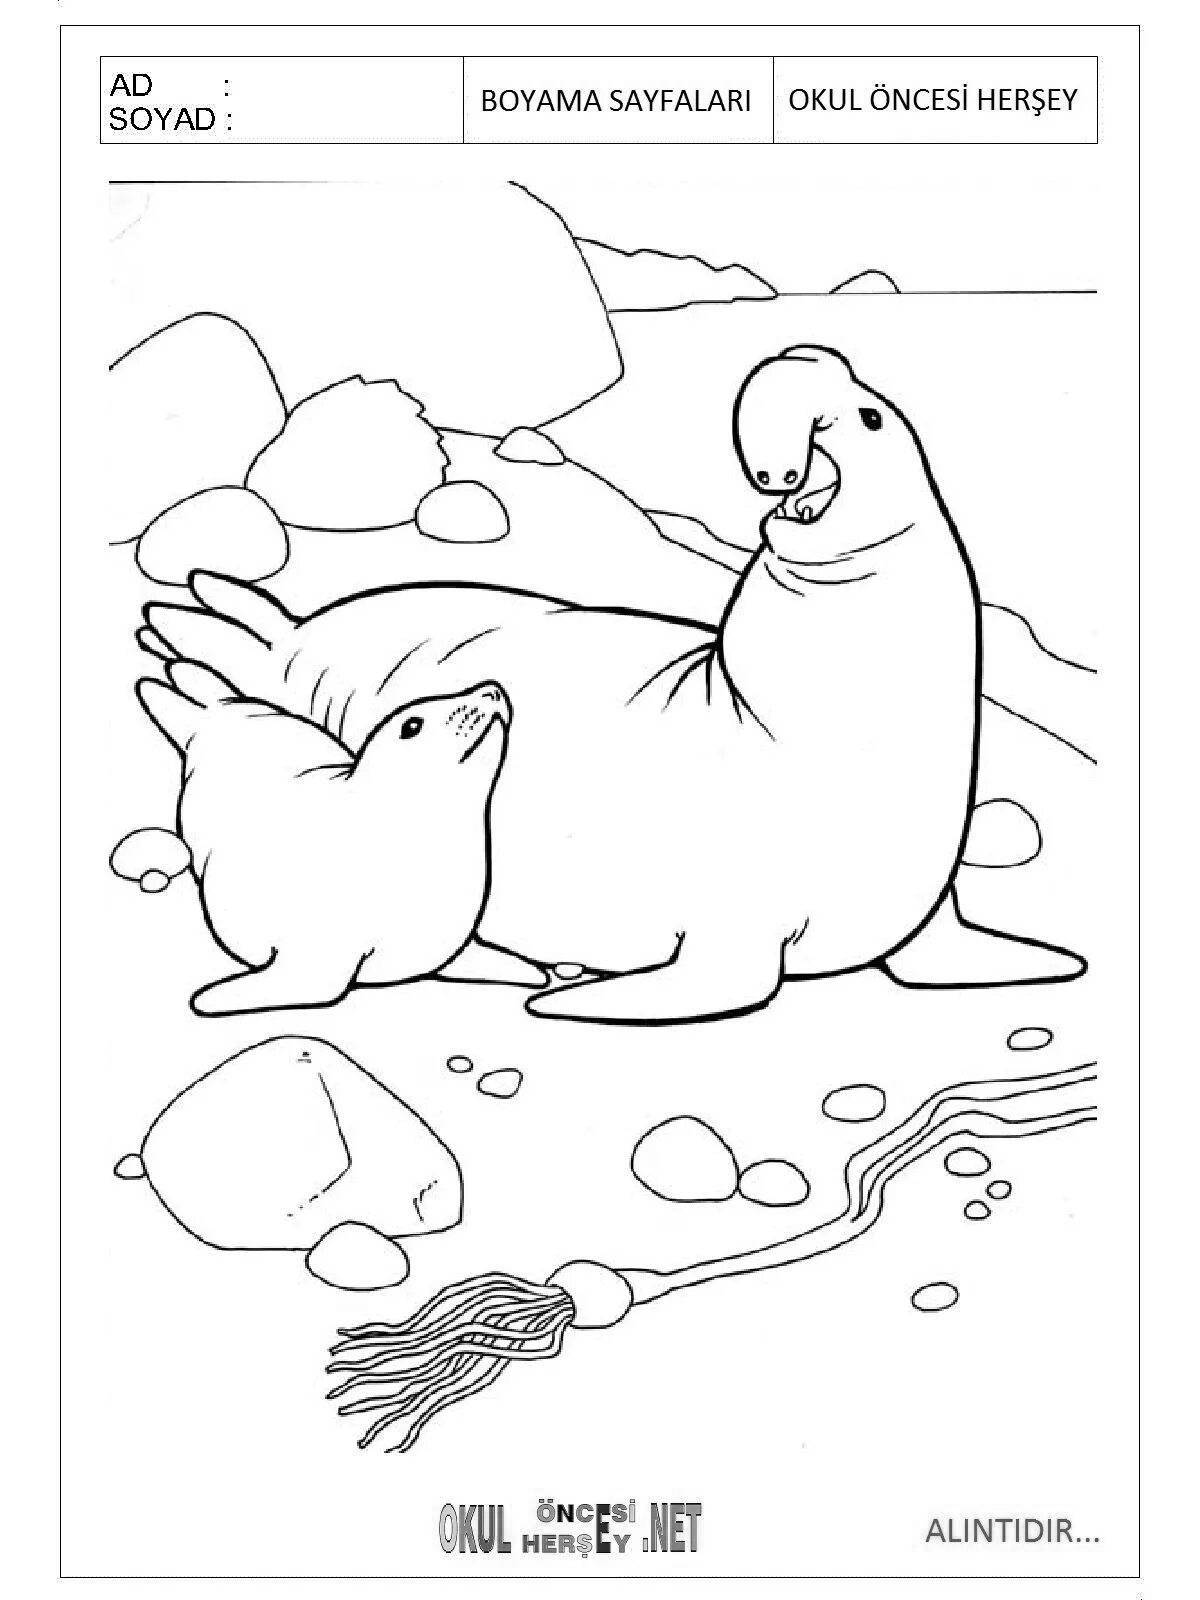 Coloring pages animals of the south